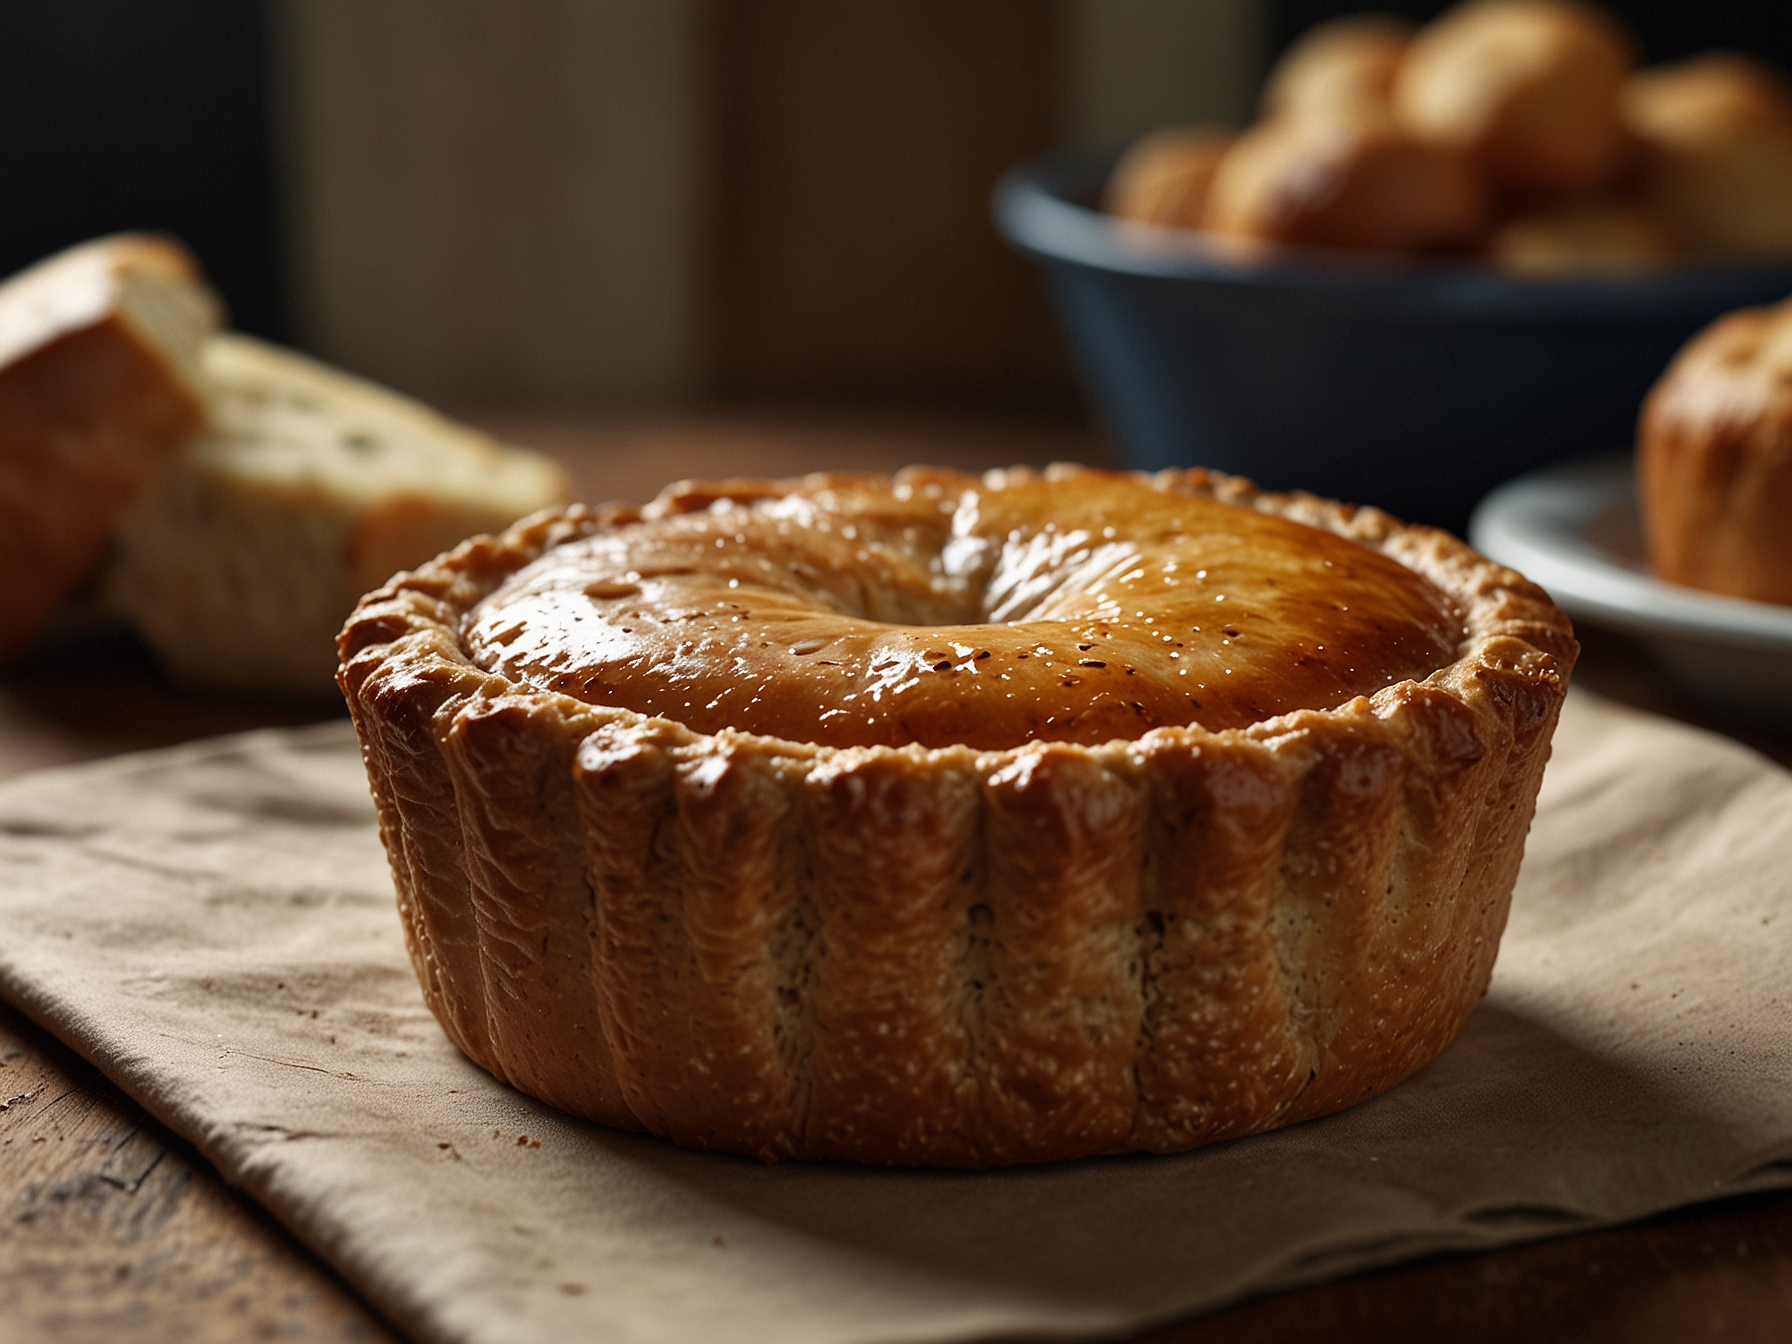 A close-up of a £2 pork pie, showcasing its golden-brown crust and generous, well-seasoned pork filling. Perfectly portioned and ready for a picnic basket.